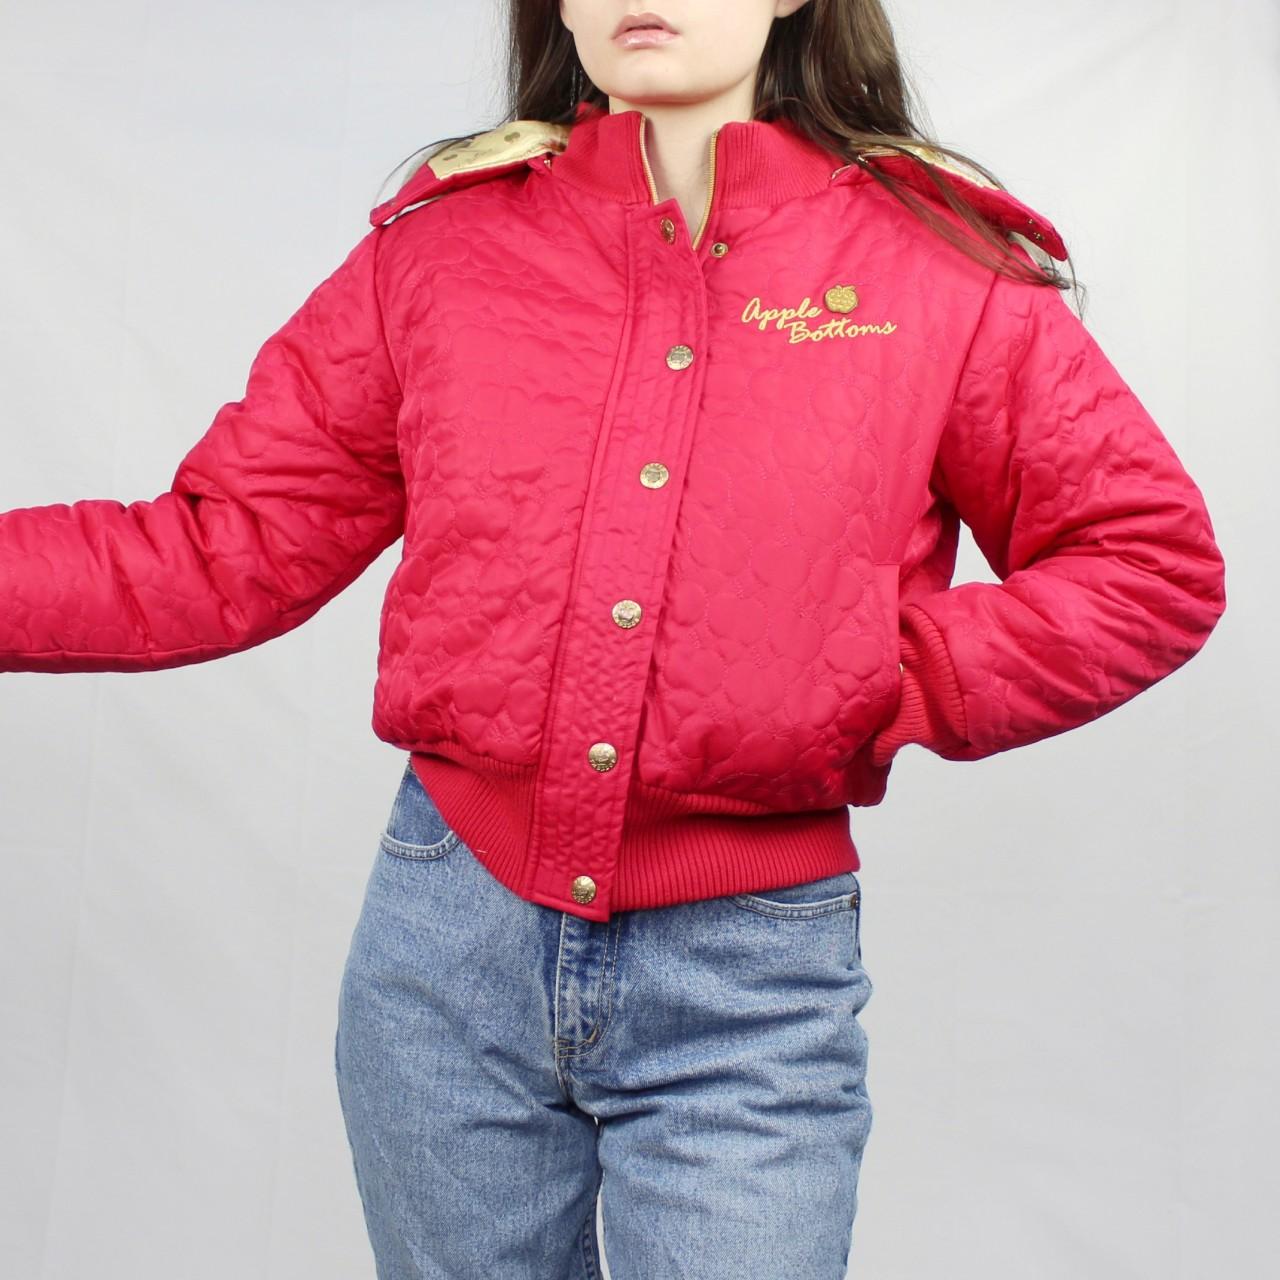 Women's Red and Gold Jacket (4)